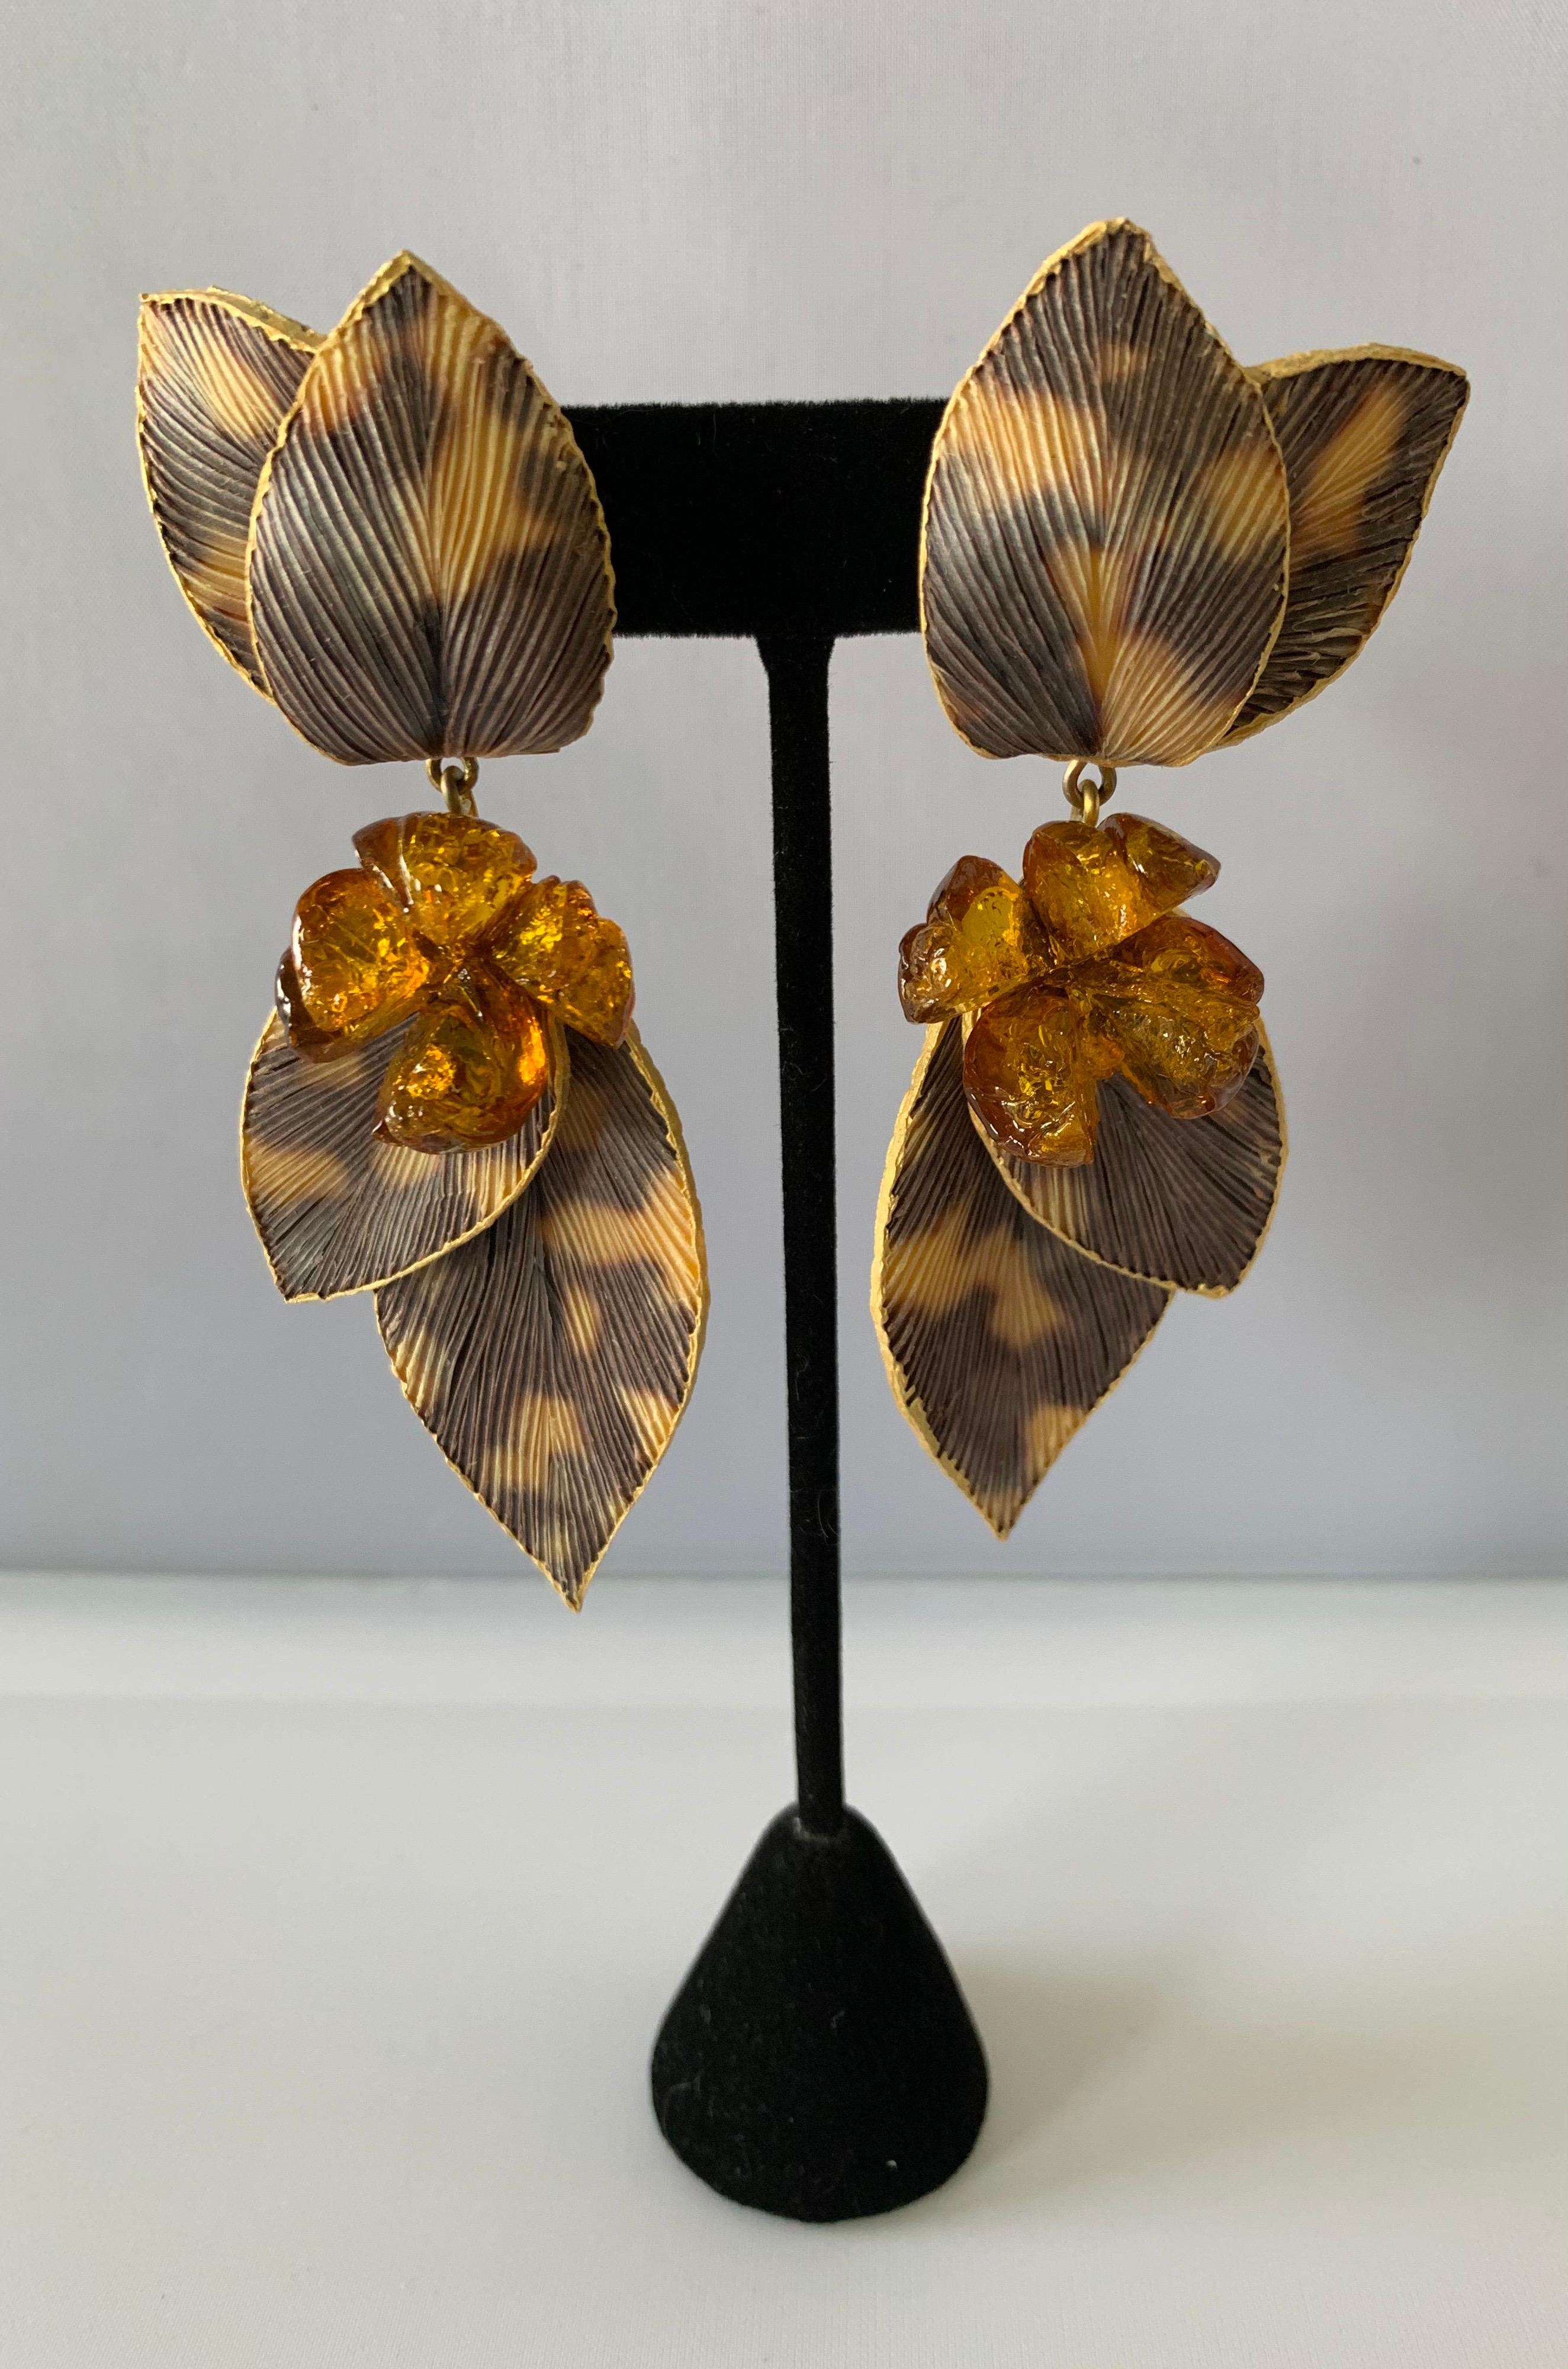 Contemporary French designer taupe-gold and grey chandelier statement clip-on earrings made in Paris by Cilea - the lightweight chic earrings are comprised of enameline (enamel and resin) and feature a bold/unique architectural design with exquisite